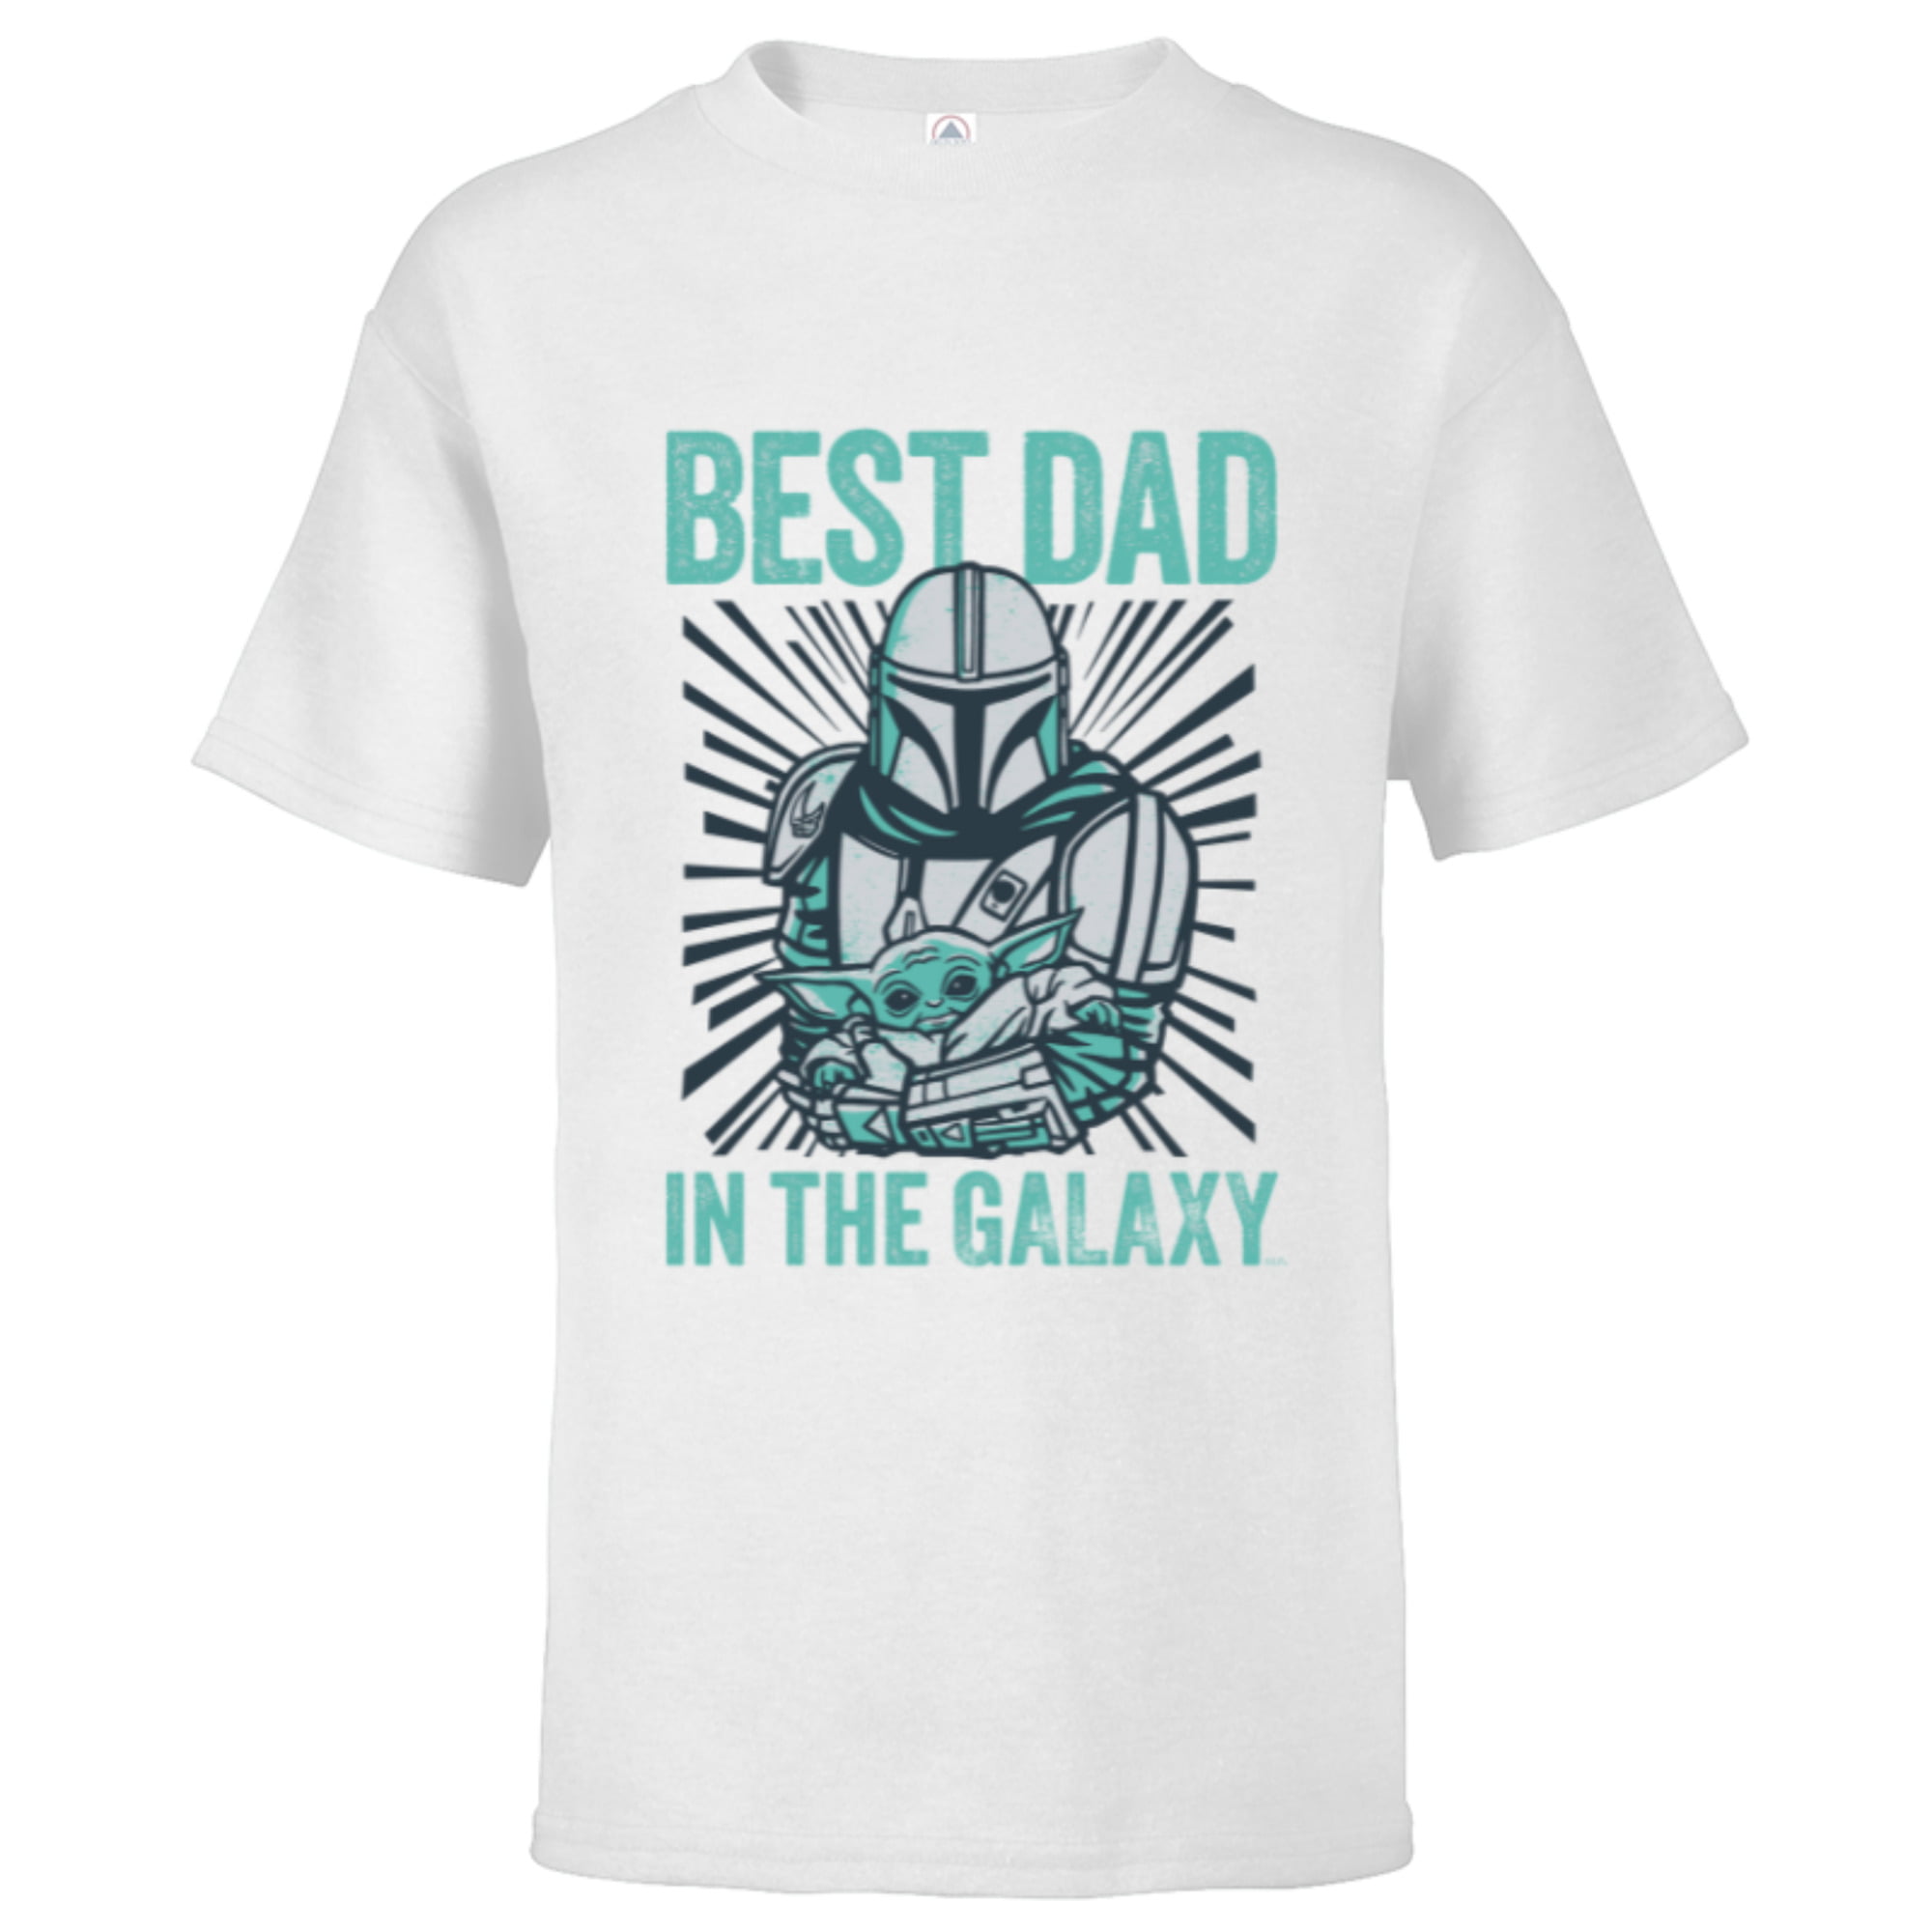 Star Wars The Mandalorian and Grogu Best Dad in the Galaxy - Short Sleeve T- Shirt for Kids - Customized-White